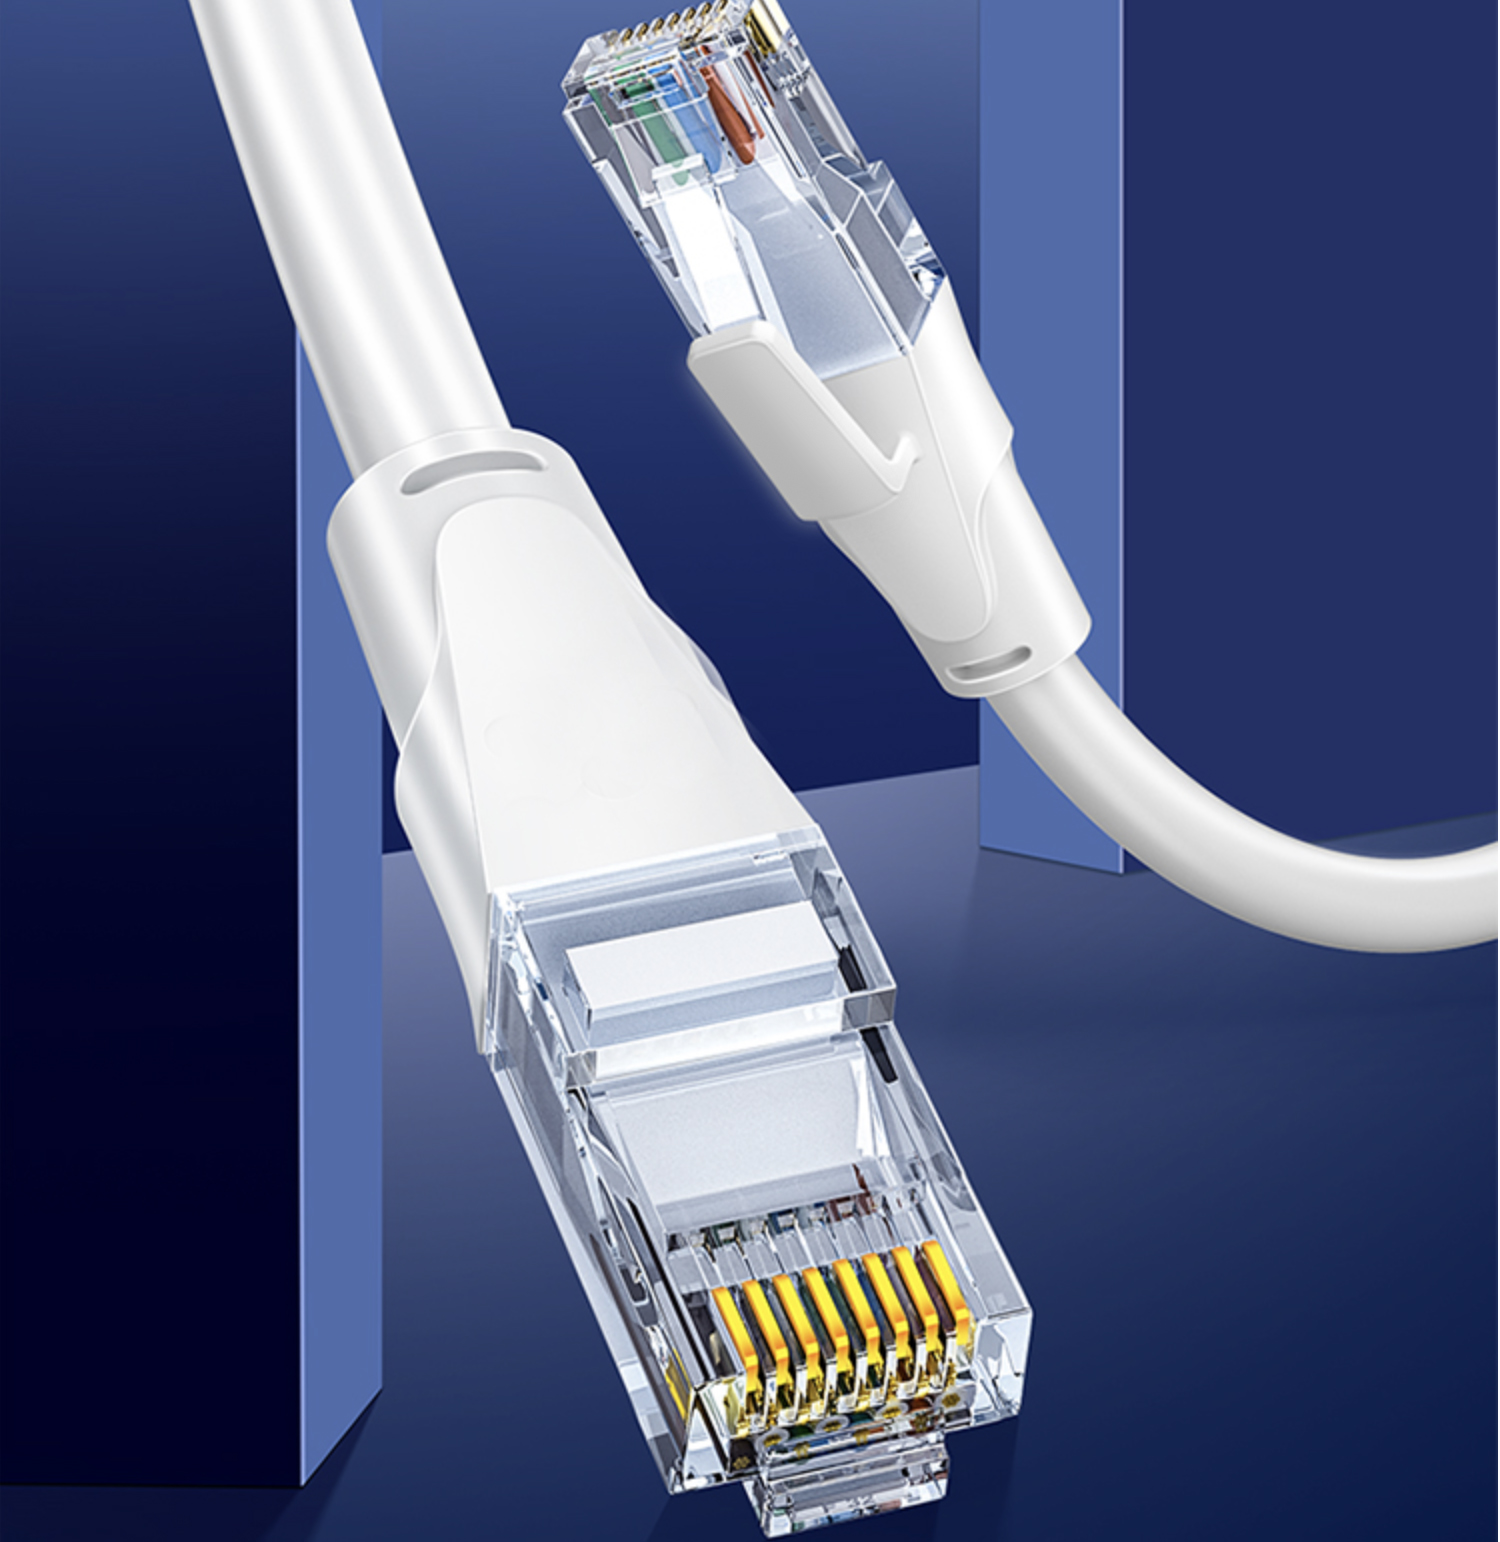 1000M White 0.5m, 1m, 2m, 3m, 5m, 8m, 10m, 15m Cable RJ45 CAT6 Ethernet  Network Flat LAN Cable UTP Patch Router Cables